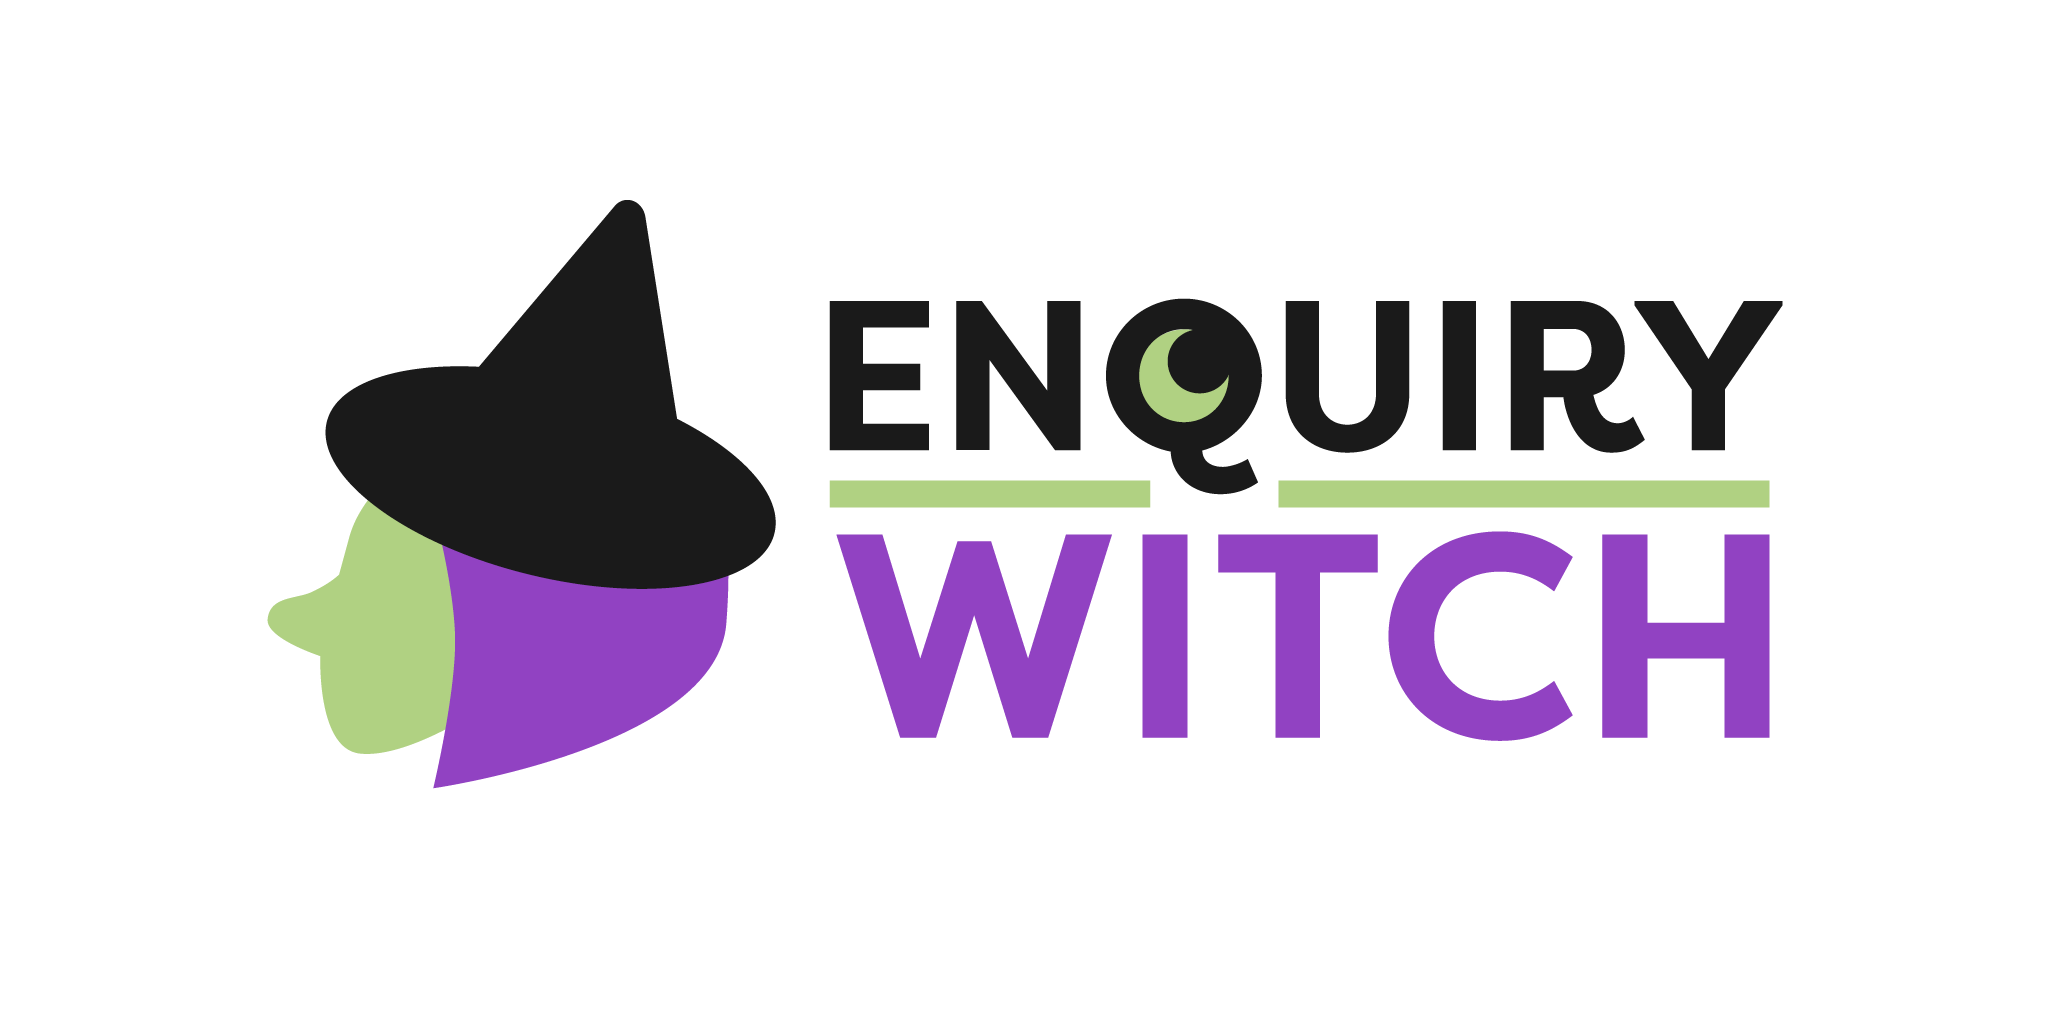 The EnquiryWitch logo